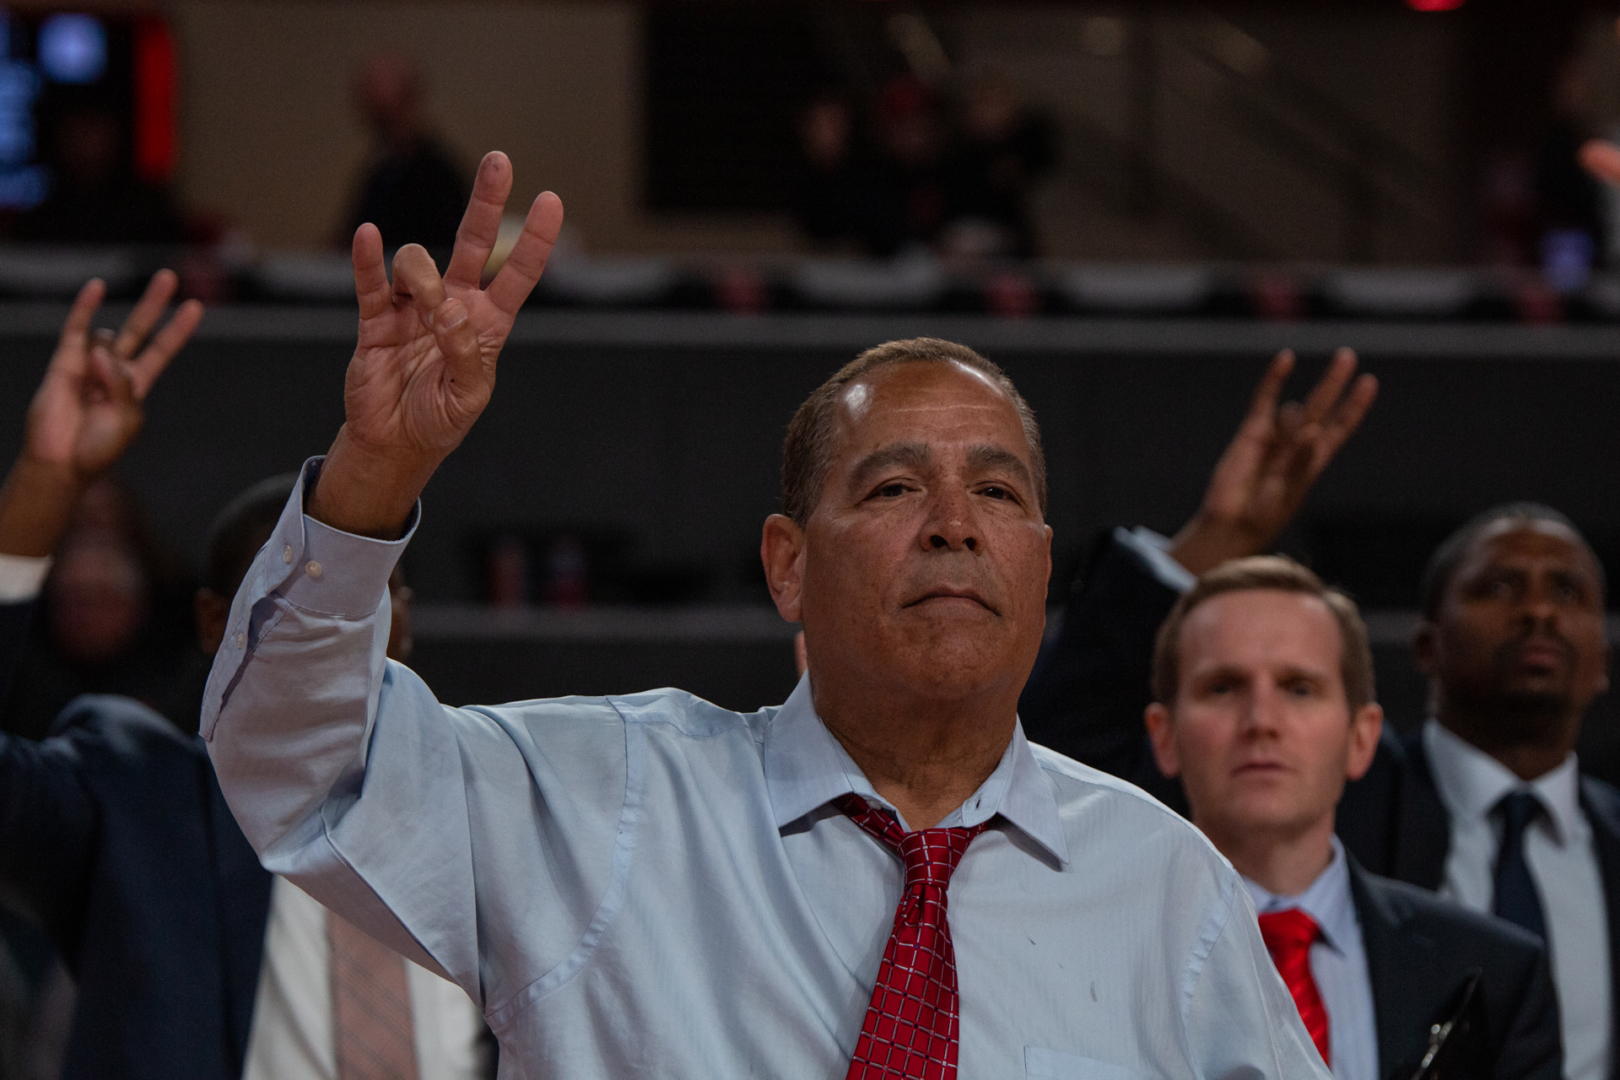 Head coach Kelvin Sampson said he was a "a little bit surprised by the Cougars' offensive stats so far this season, particularly Houston's 86 points per game average and nearly 50 percent shooting. | Kathryn Lenihan/The Cougar